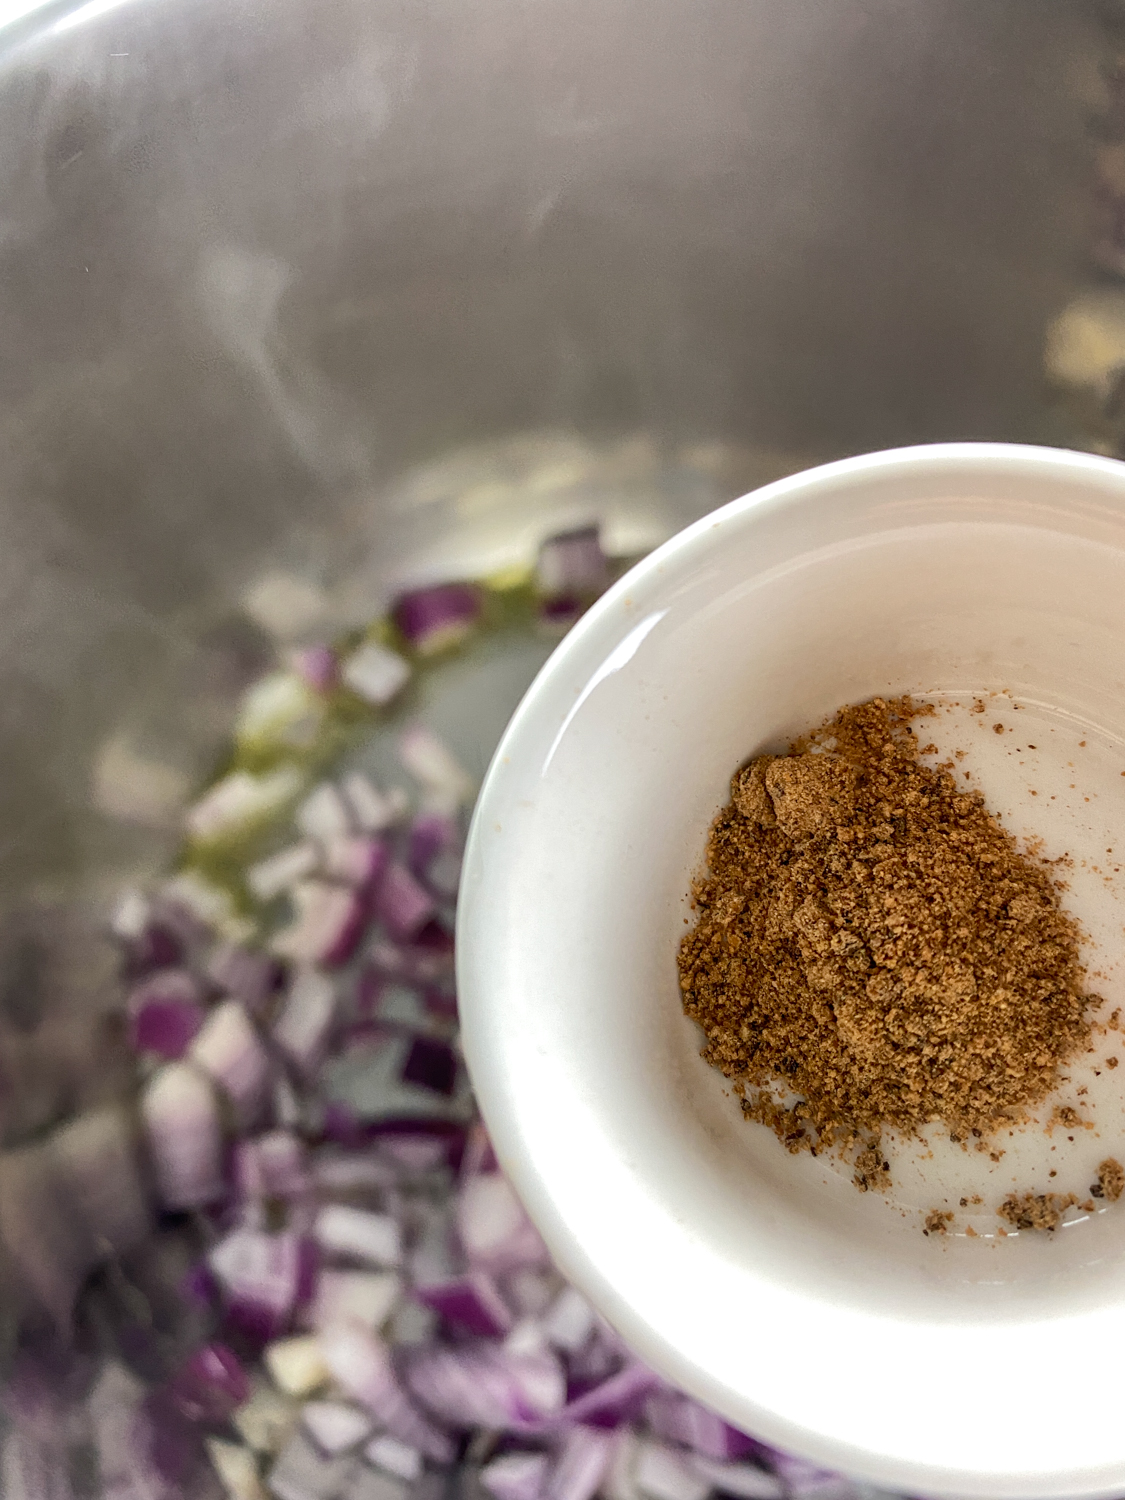 Add the freshly grated ginger, cinnamon, nutmeg, rosemary, and thyme.